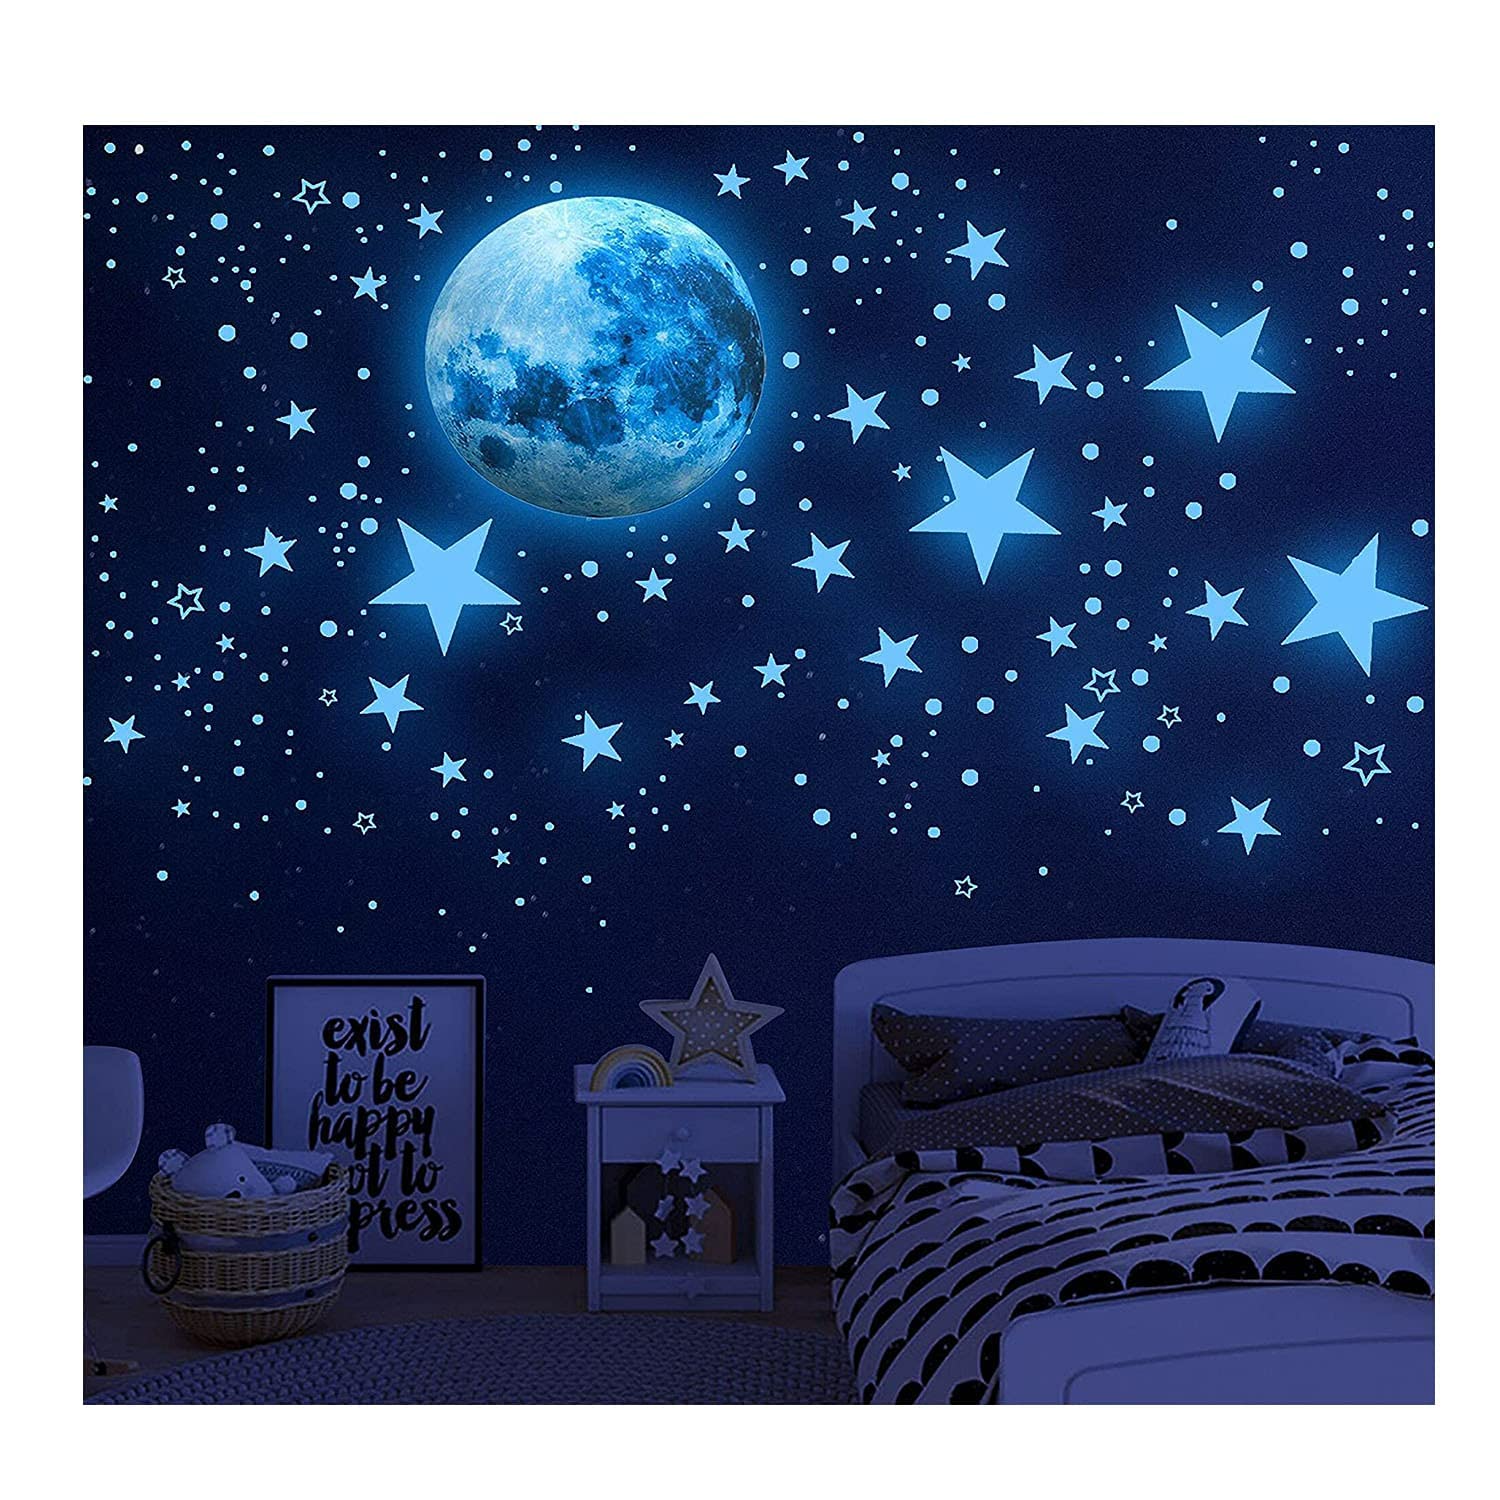 SparkSkies Glow in The Dark Stars Sticker Decals for Ceiling,Stars and Moon Wall Decals, 1003 Pcs Ceiling Stars Kids Room Wall Decors, Perfect for Kids Nursery Bedroom Living Room, House Decoration